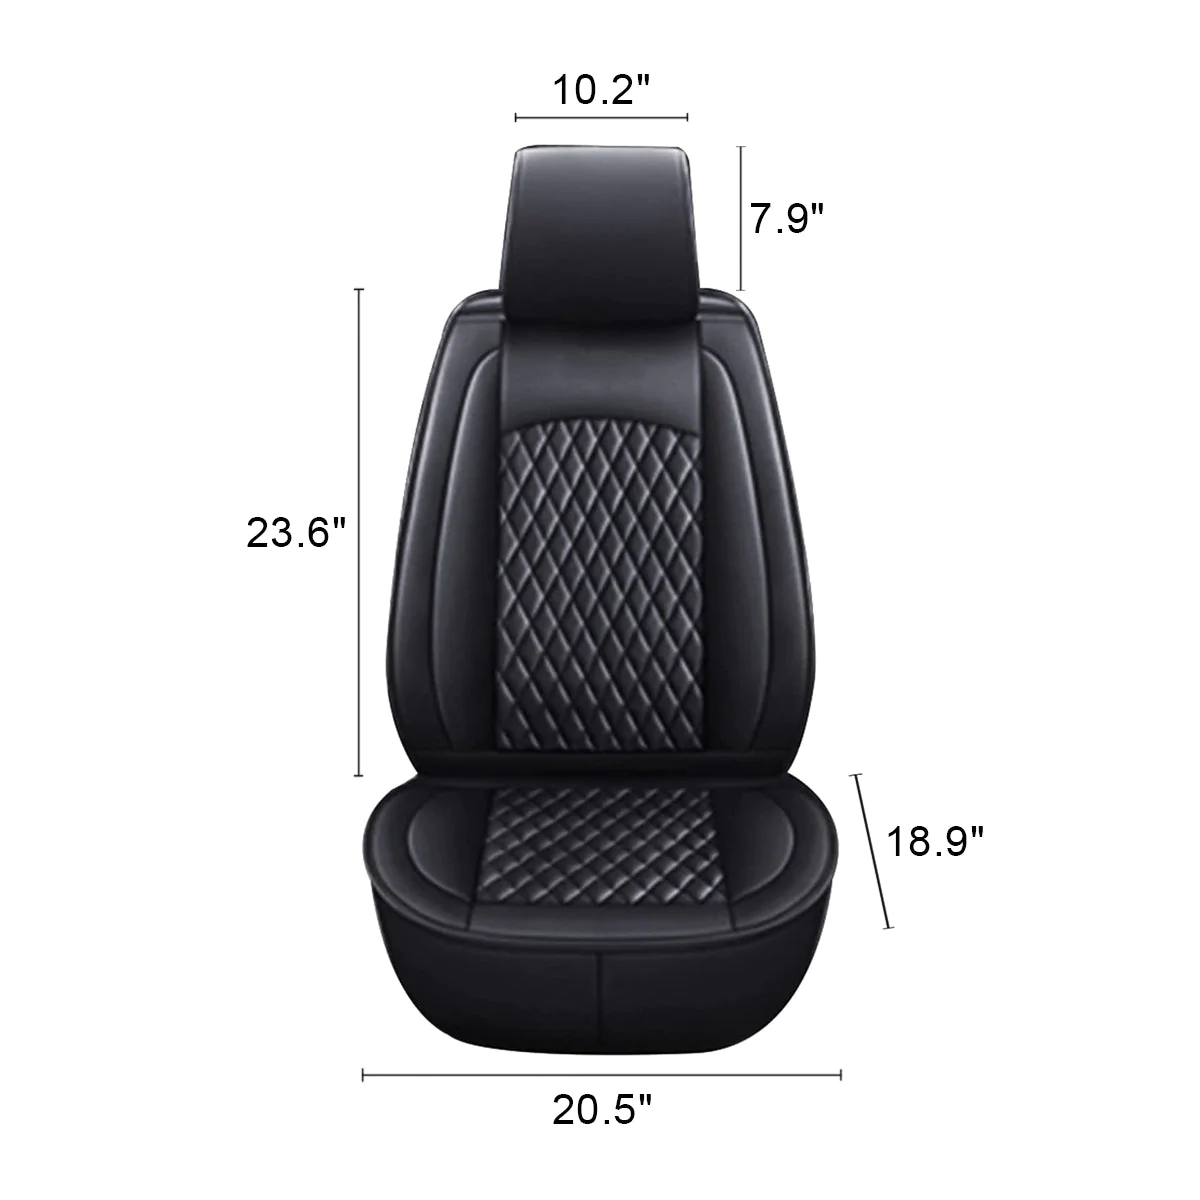 Custom Text For Seat Covers 5 Seats Full Set, Custom Fit For Your Cars, Leatherette Automotive Seat Cushion Protector Universal Fit, Vehicle Auto Interior Decor RL13988